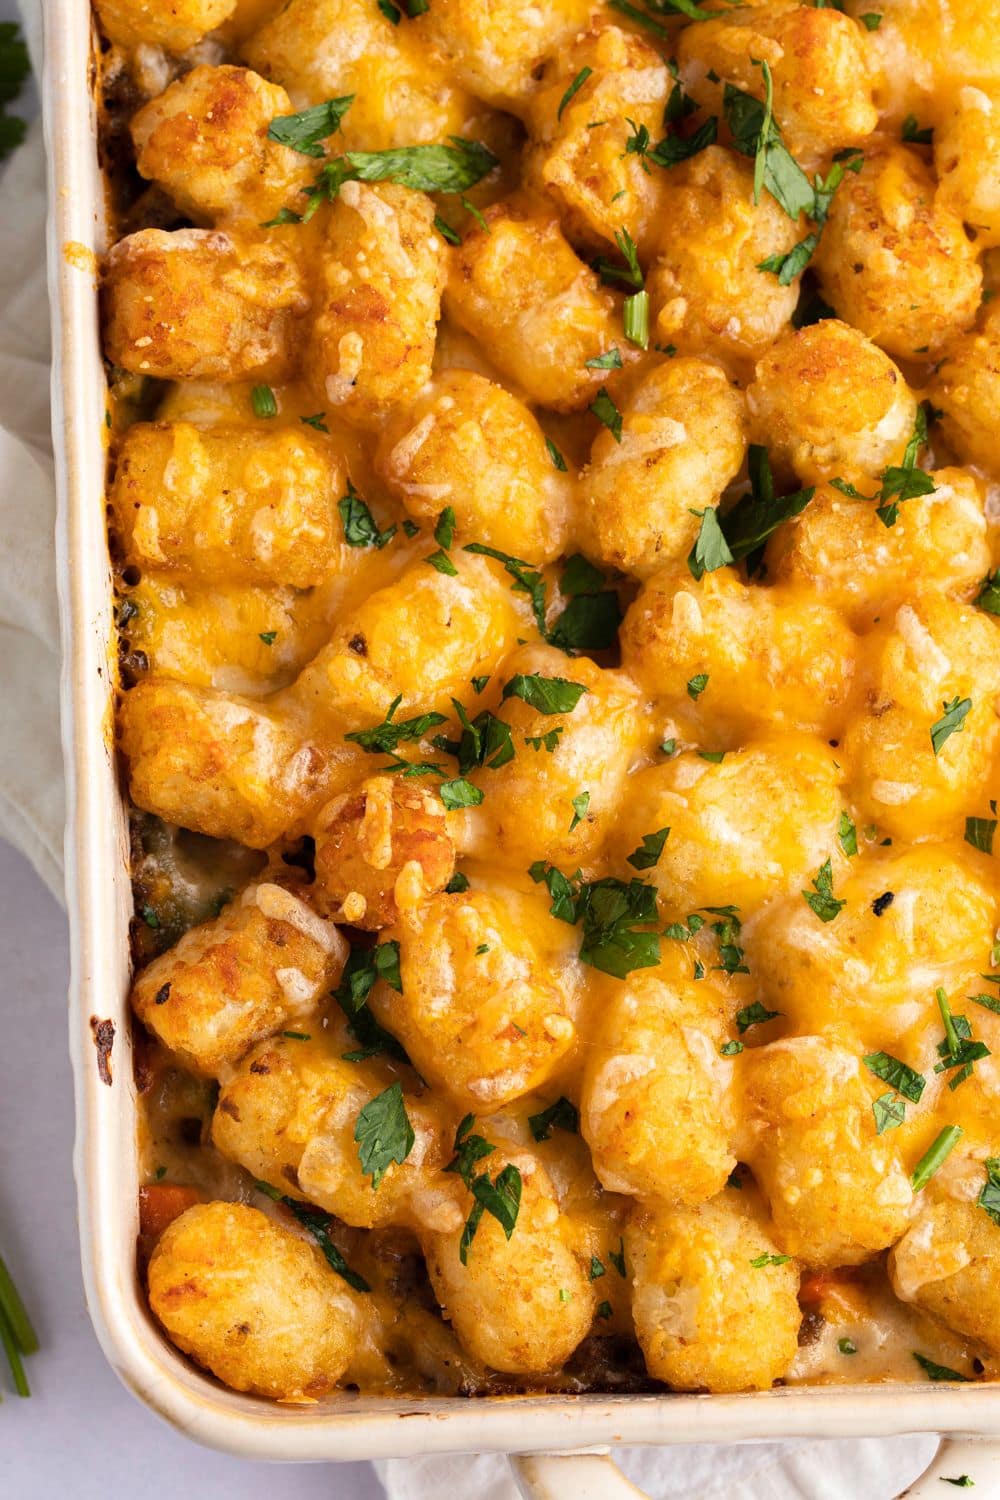 Tater Tot Casserole with Ground Beef in a white baking dish